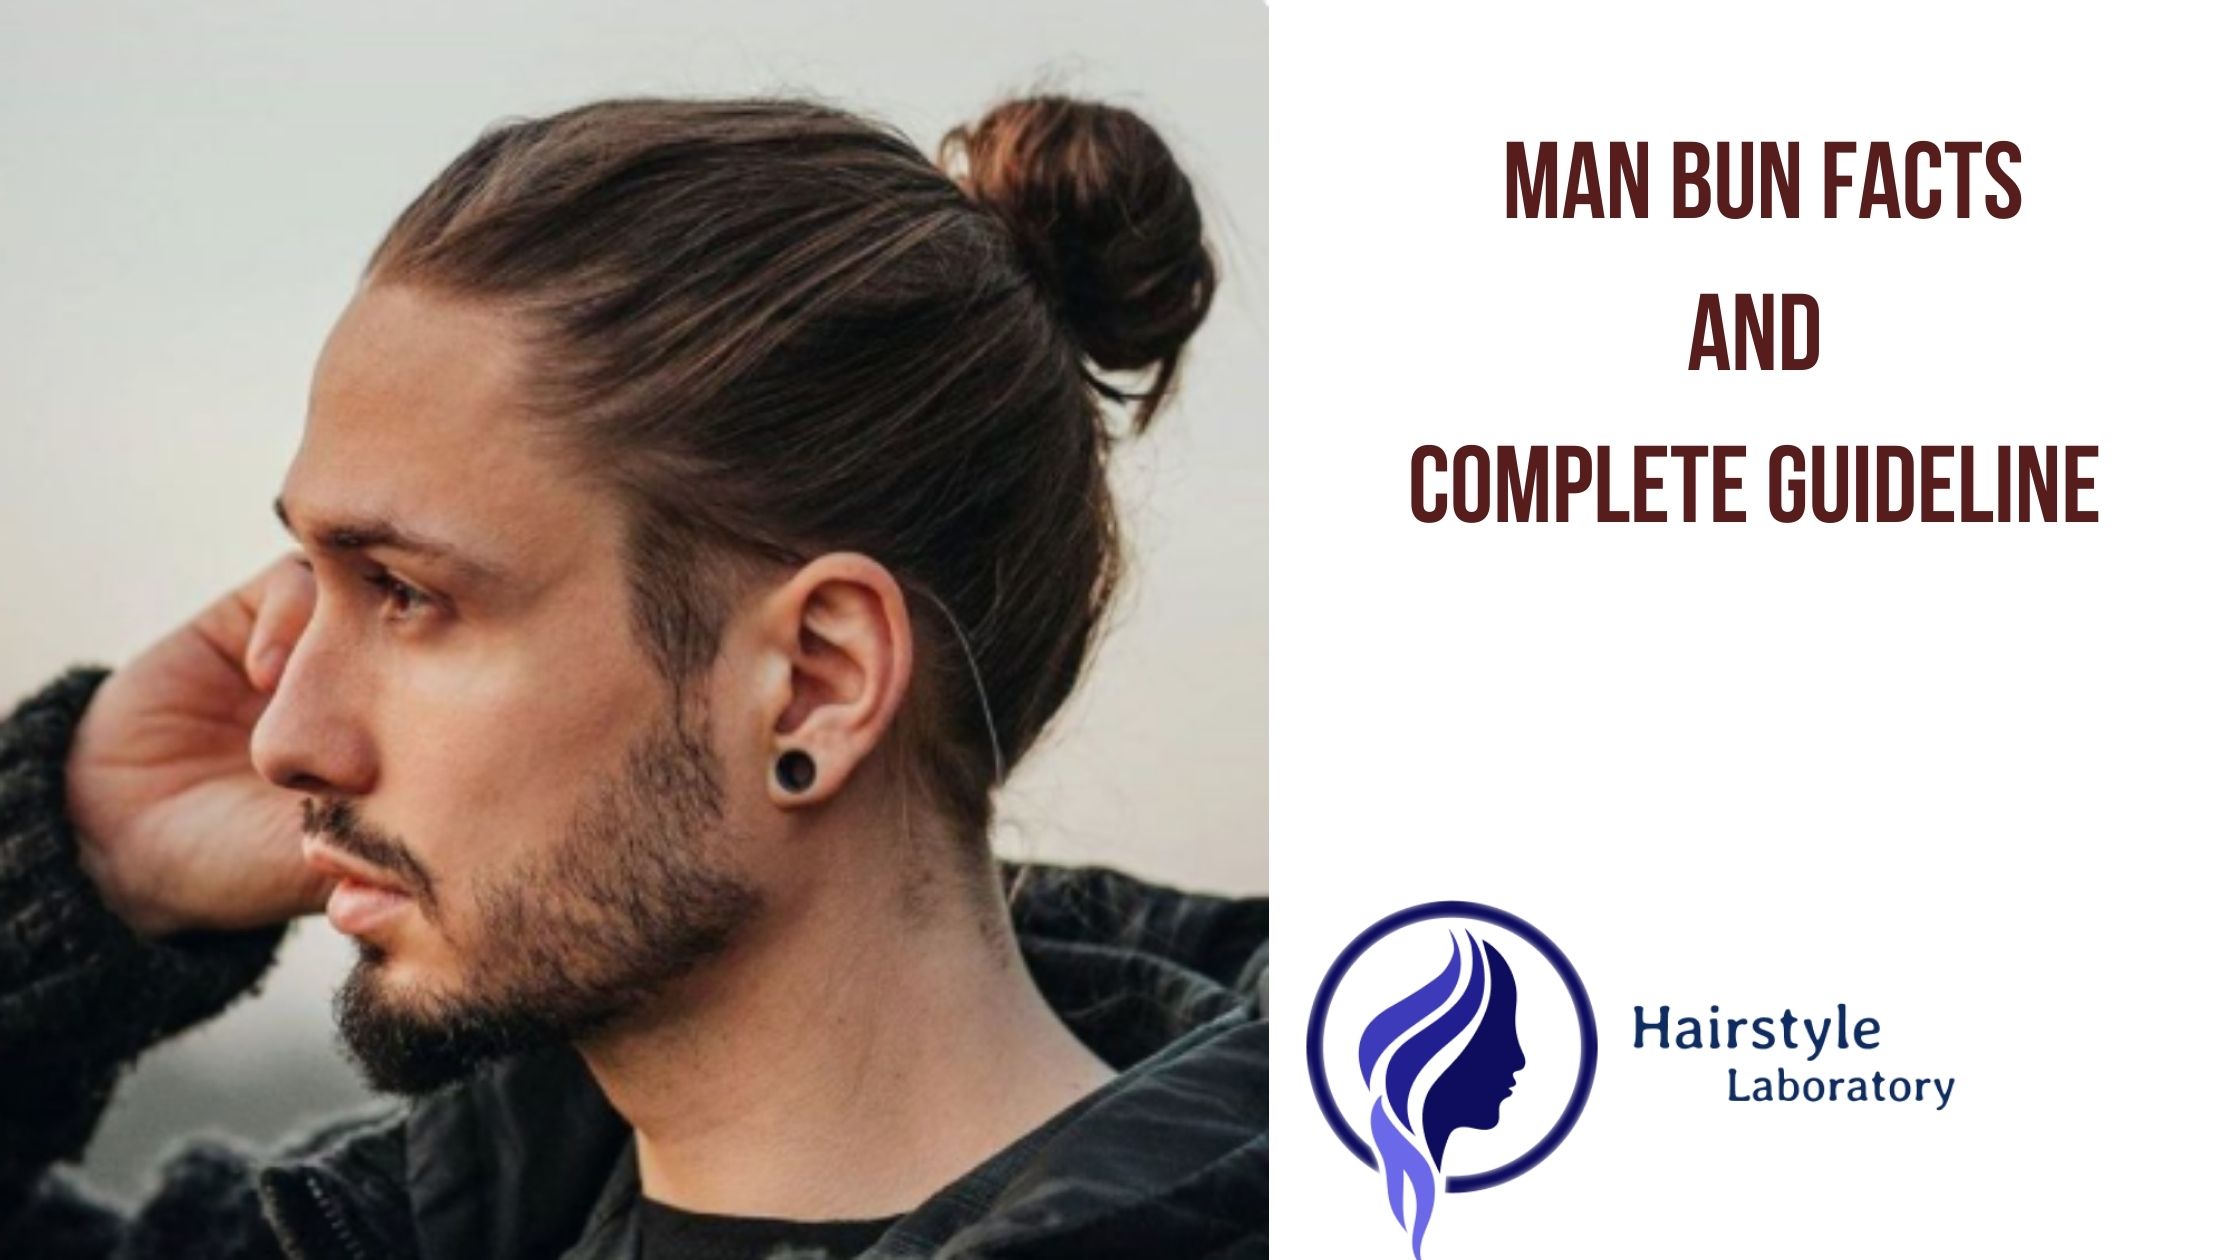 Man bun facts and complete guideline